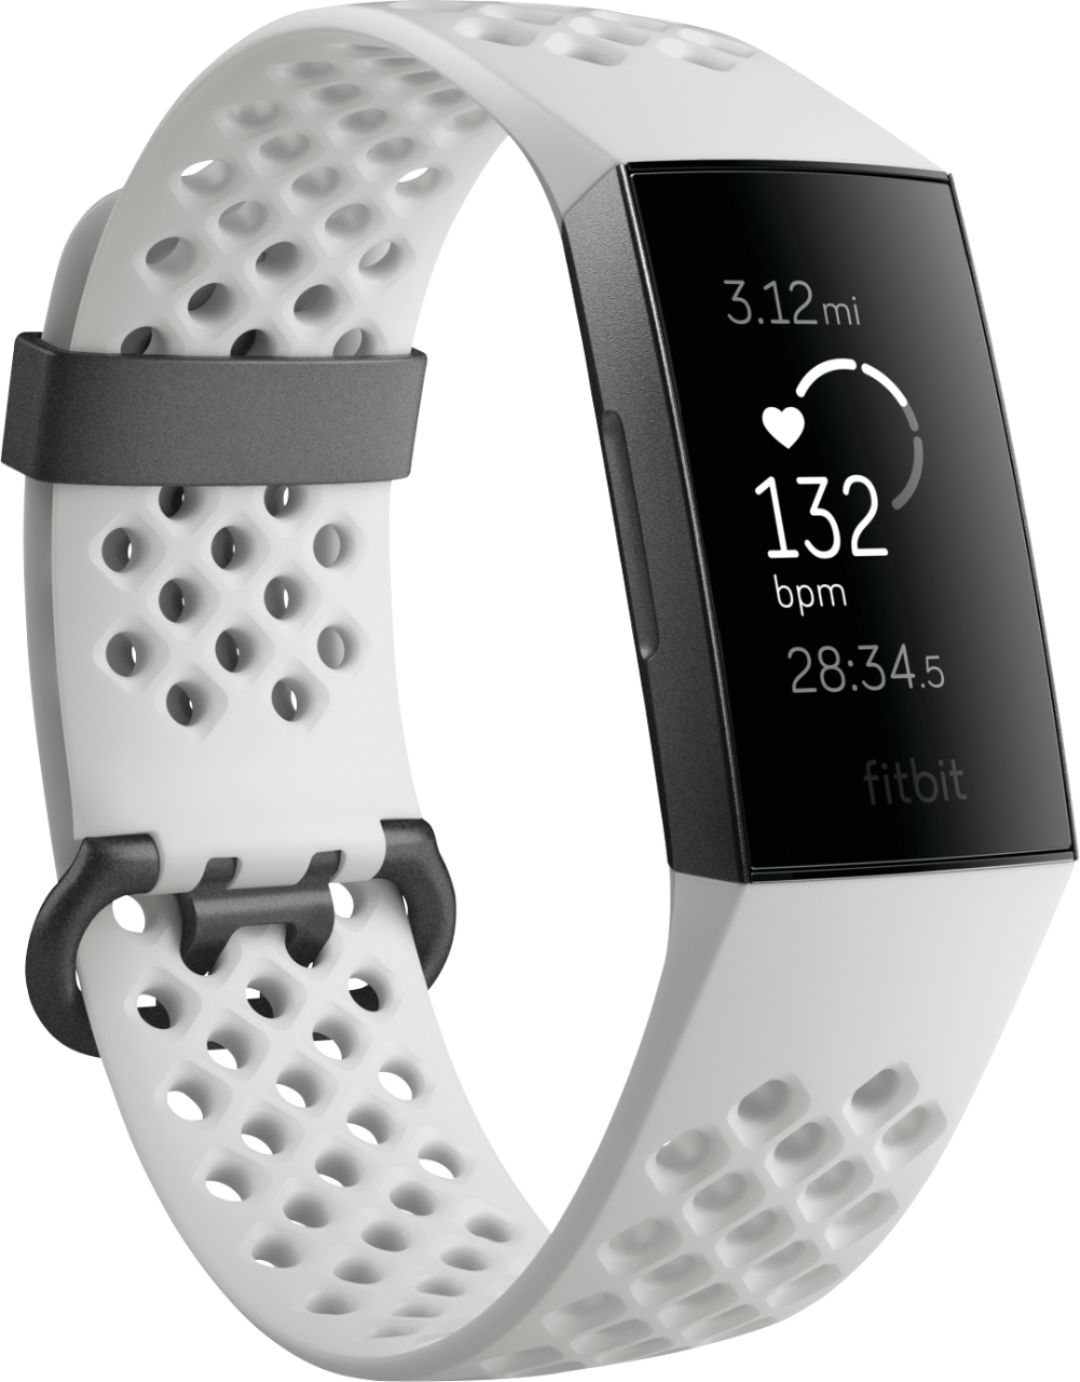 fitbit charge 3 at best buy